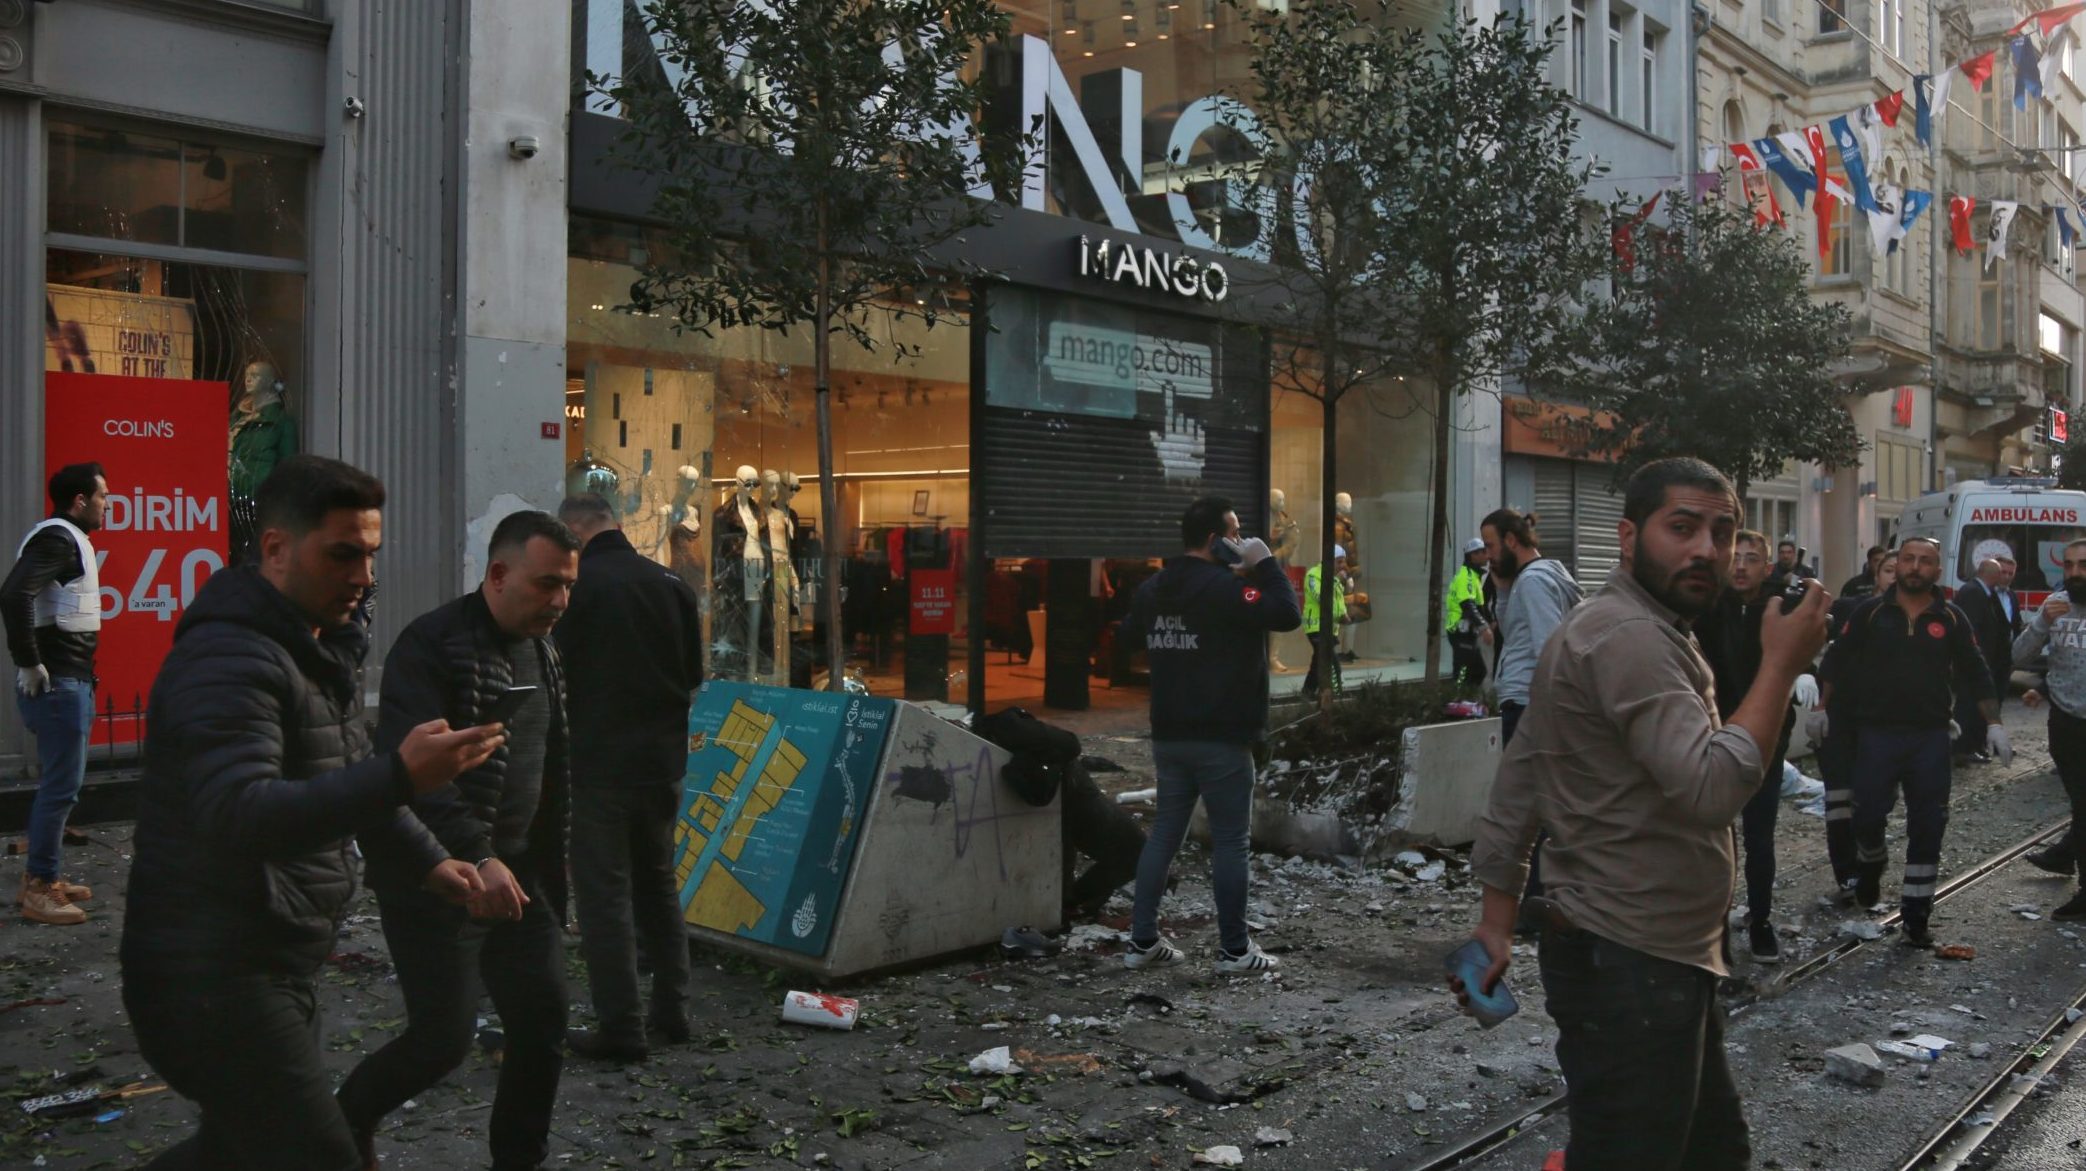 Turkey Arrests 50 in Connection With Istanbul Bombing Attack